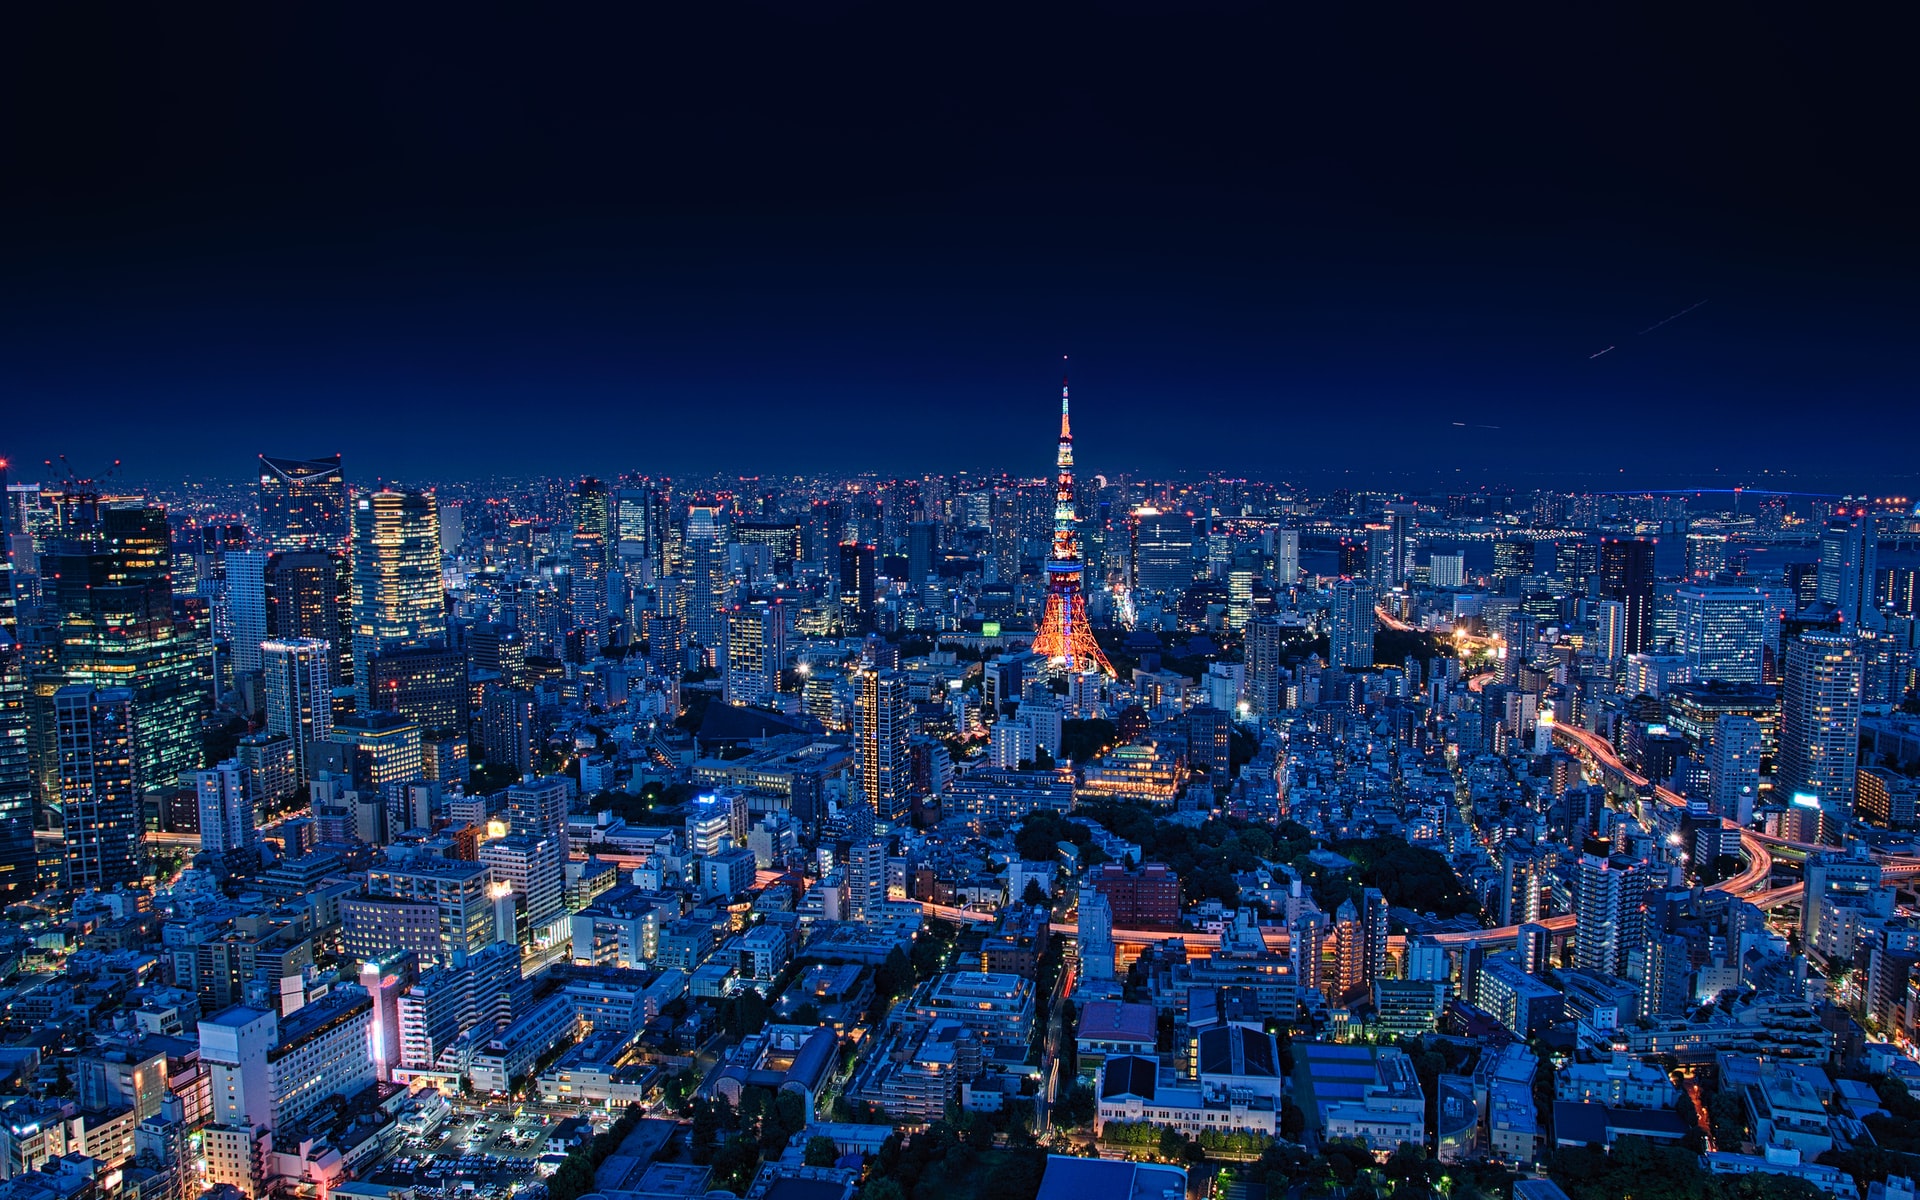 VISEO completes the acquisition of Warp to expand digital services offering in Japan